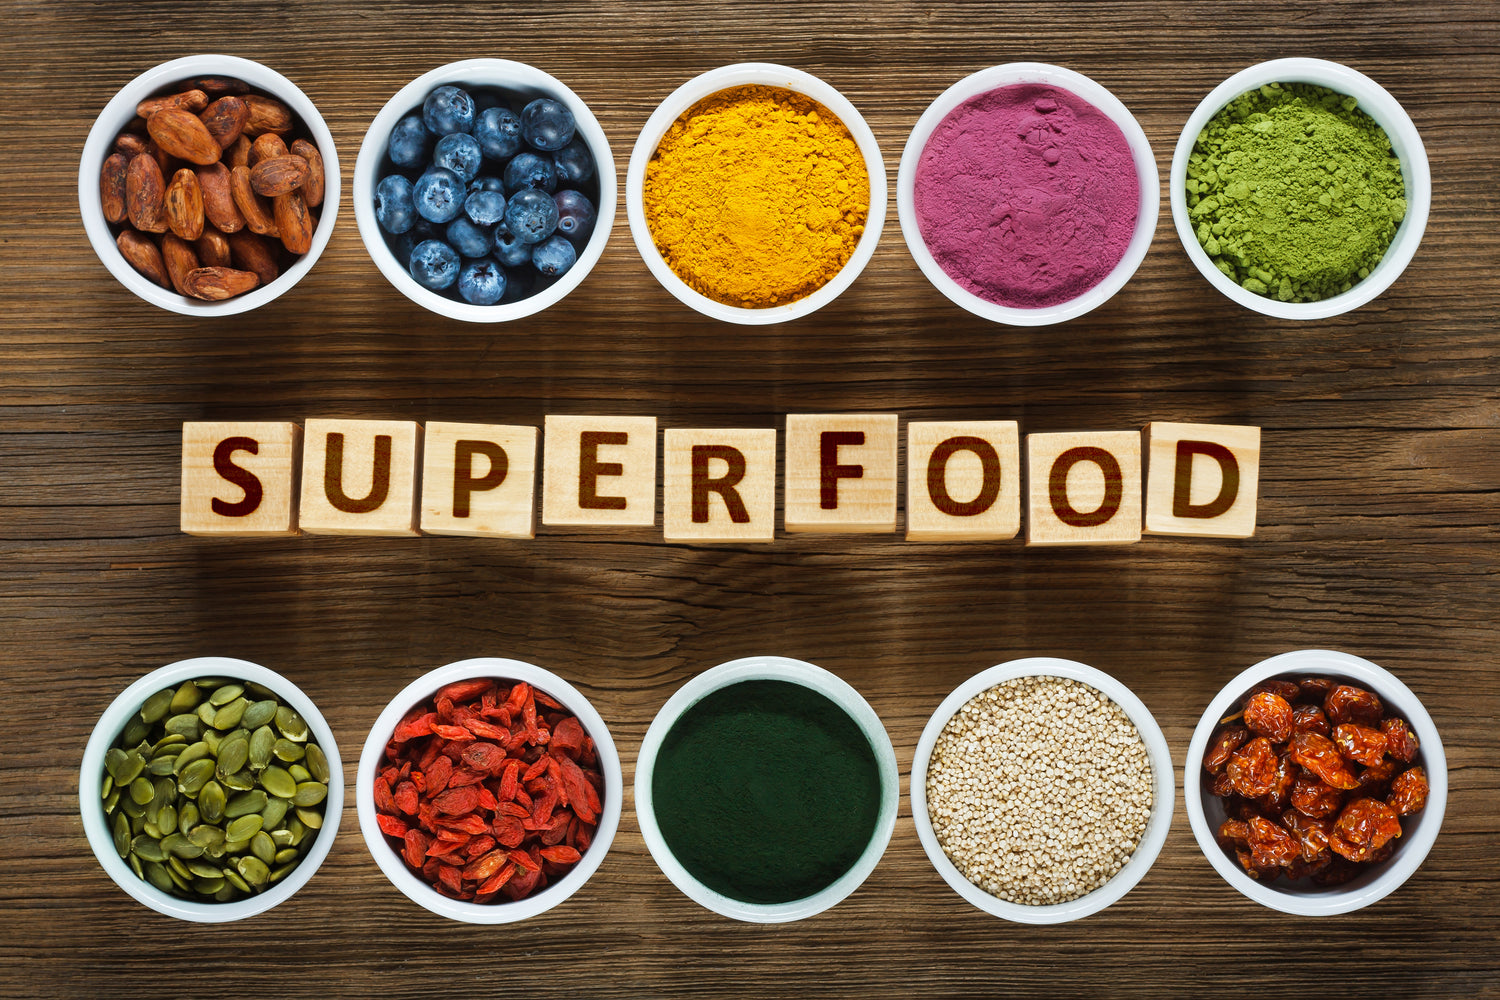 6 Superfoods to Boost Your Wellness